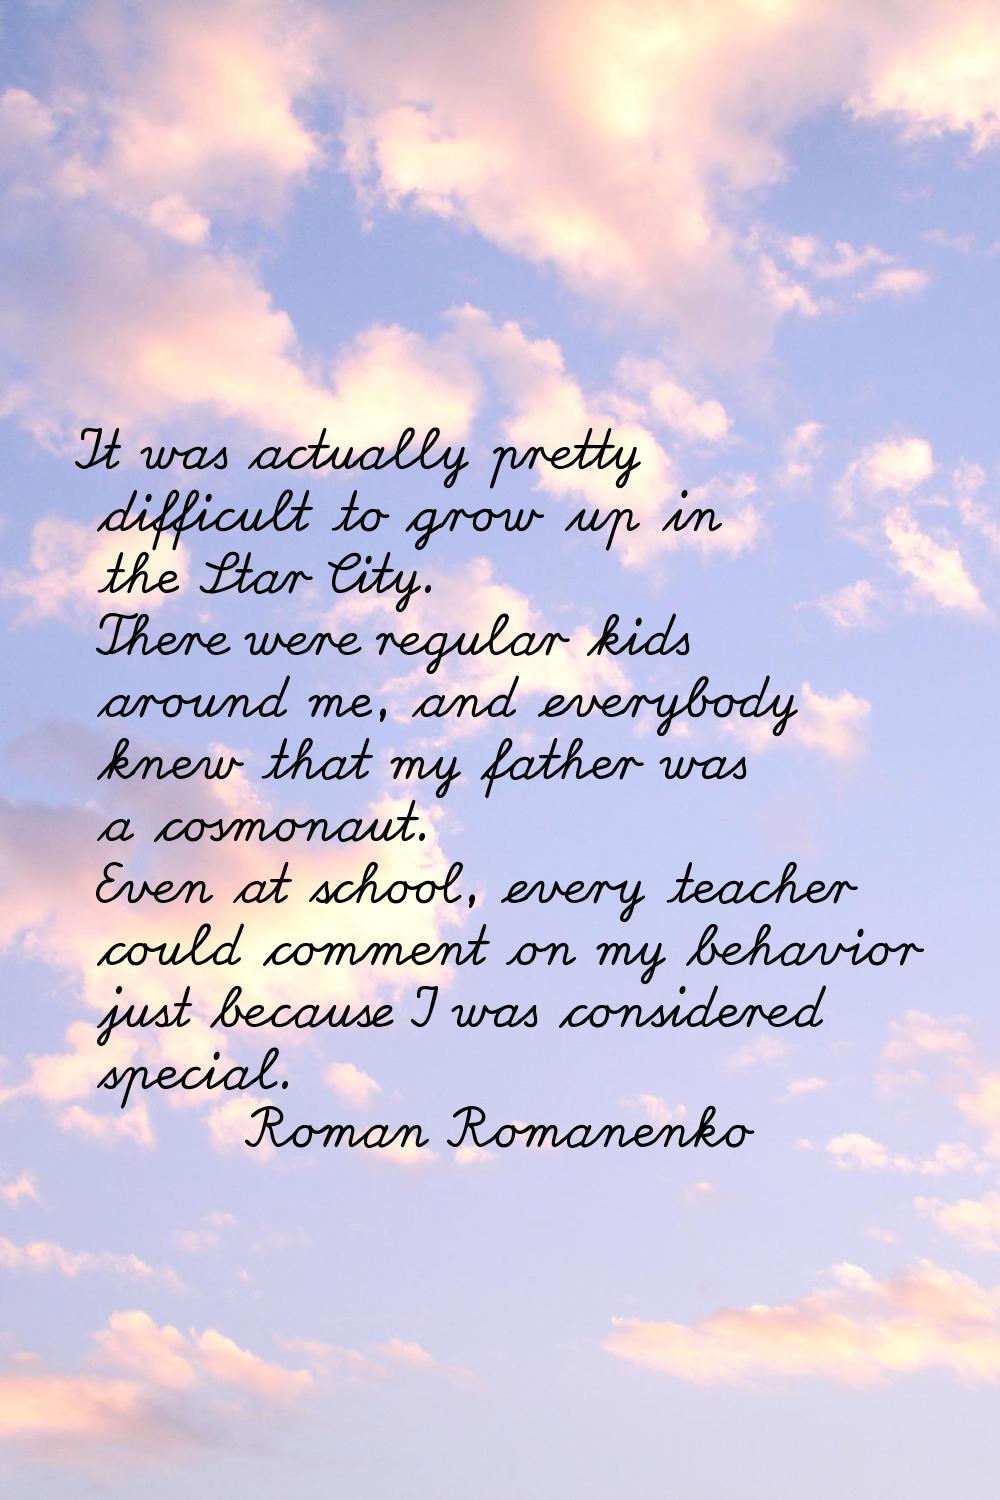 It was actually pretty difficult to grow up in the Star City. There were regular kids around me, an